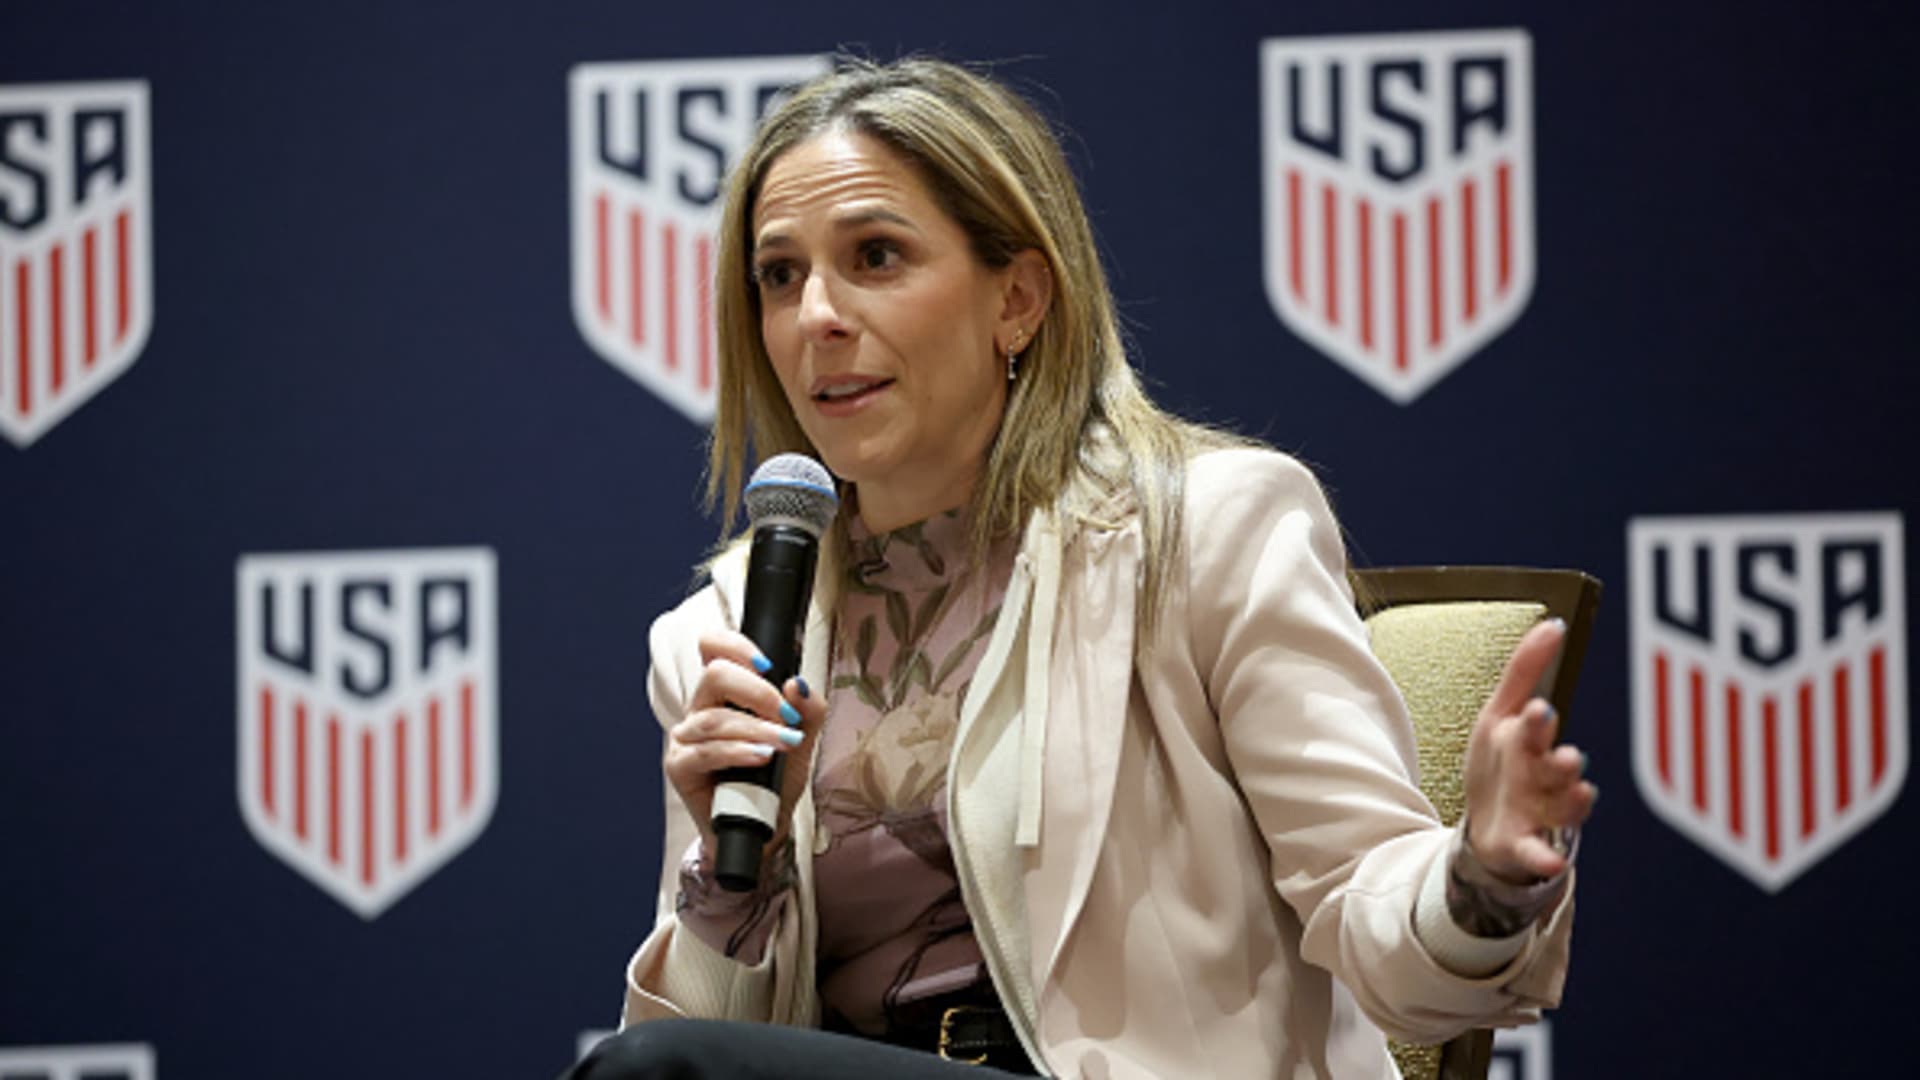 How NWSL Commissioner Jessica Berman led the league out of crisis to revive women’s soccer